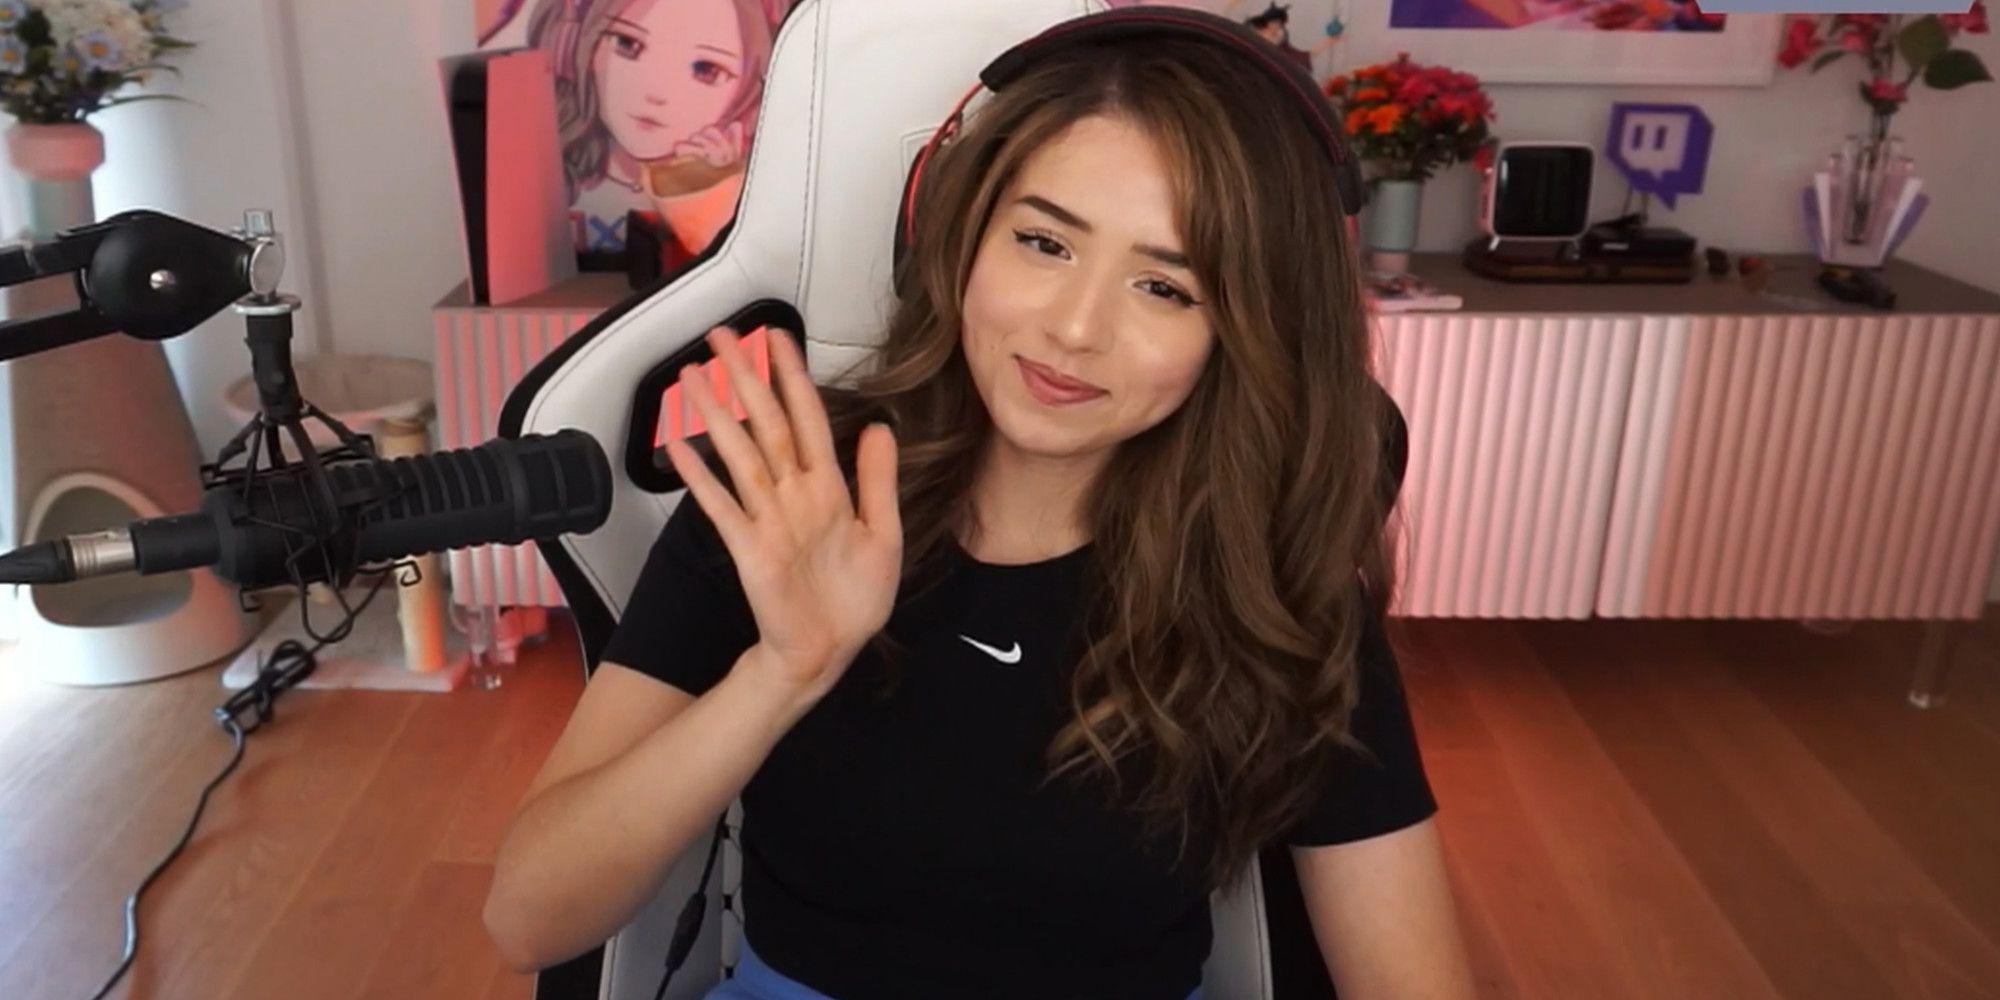 Pokimane-calls-out-Sexist-The-Obsession-With-Her-Appearance